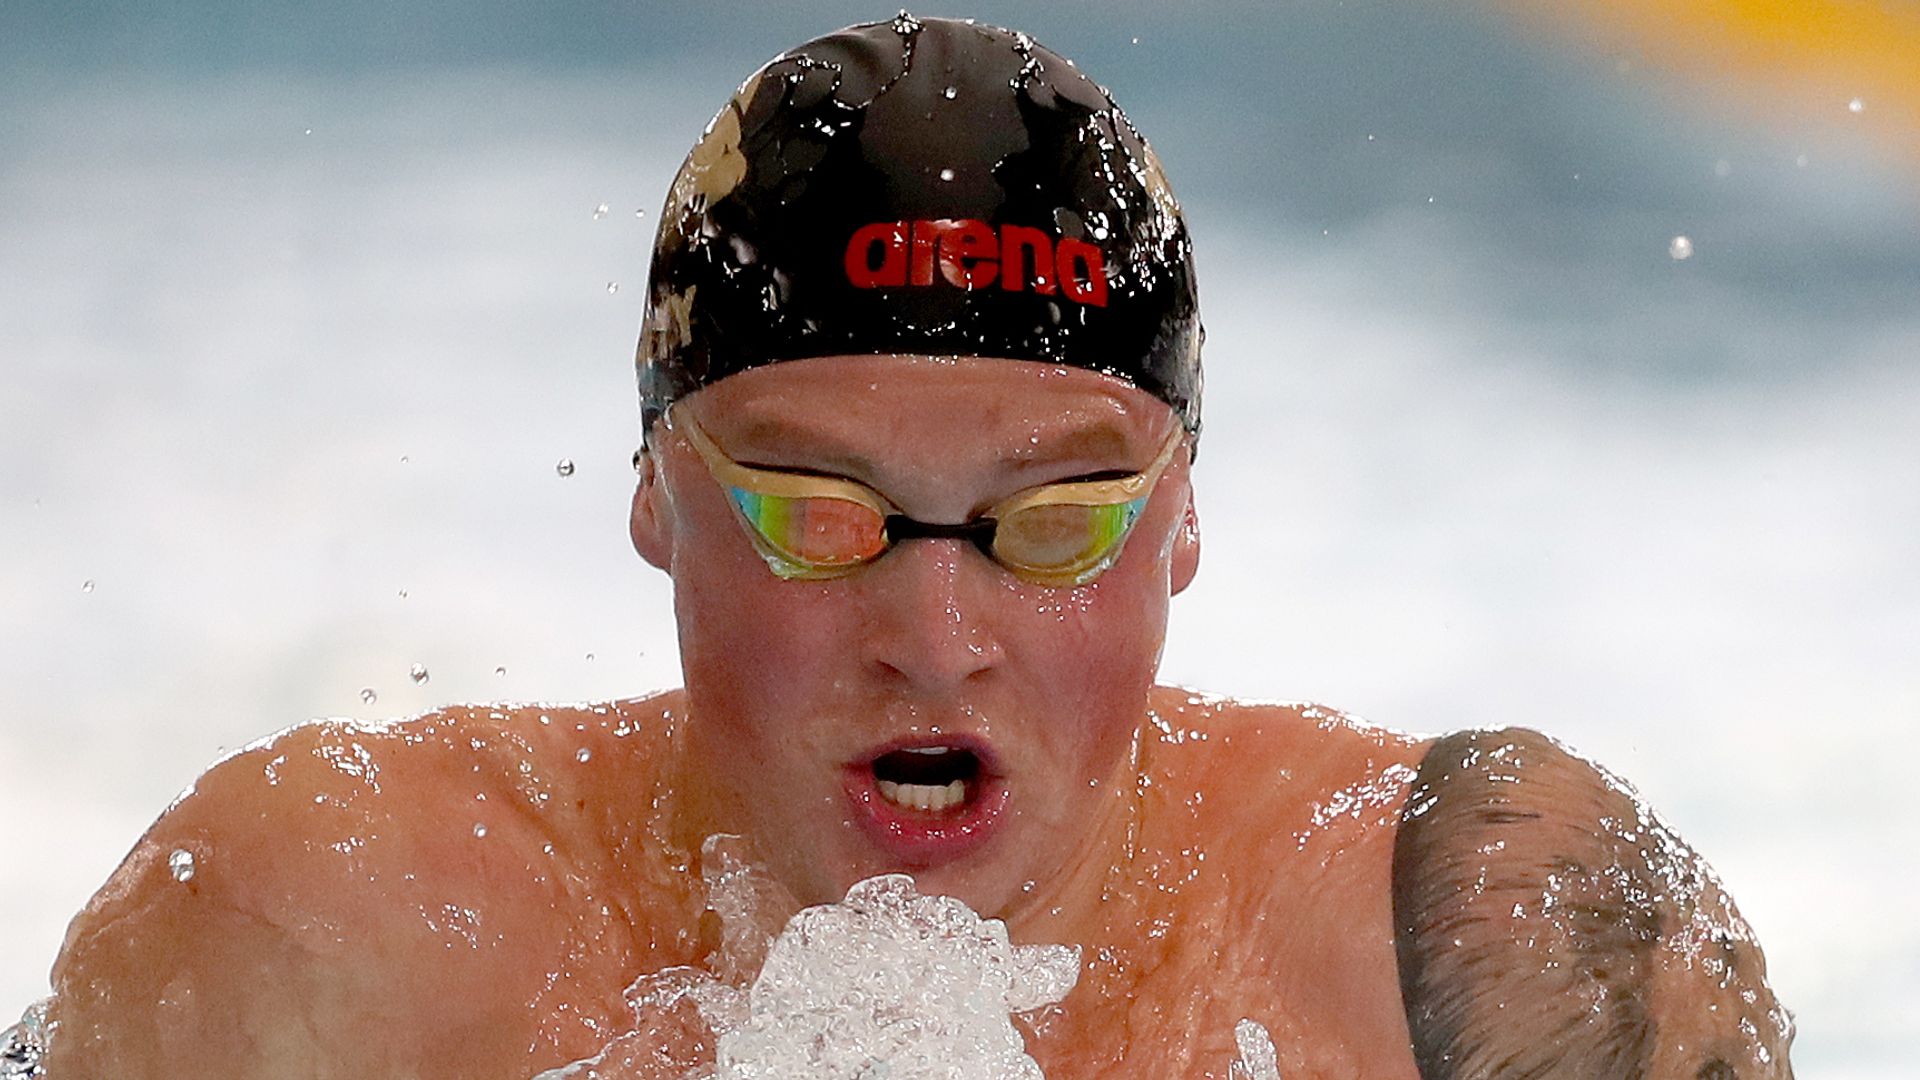 Peaty aims for another dominant display in Tokyo